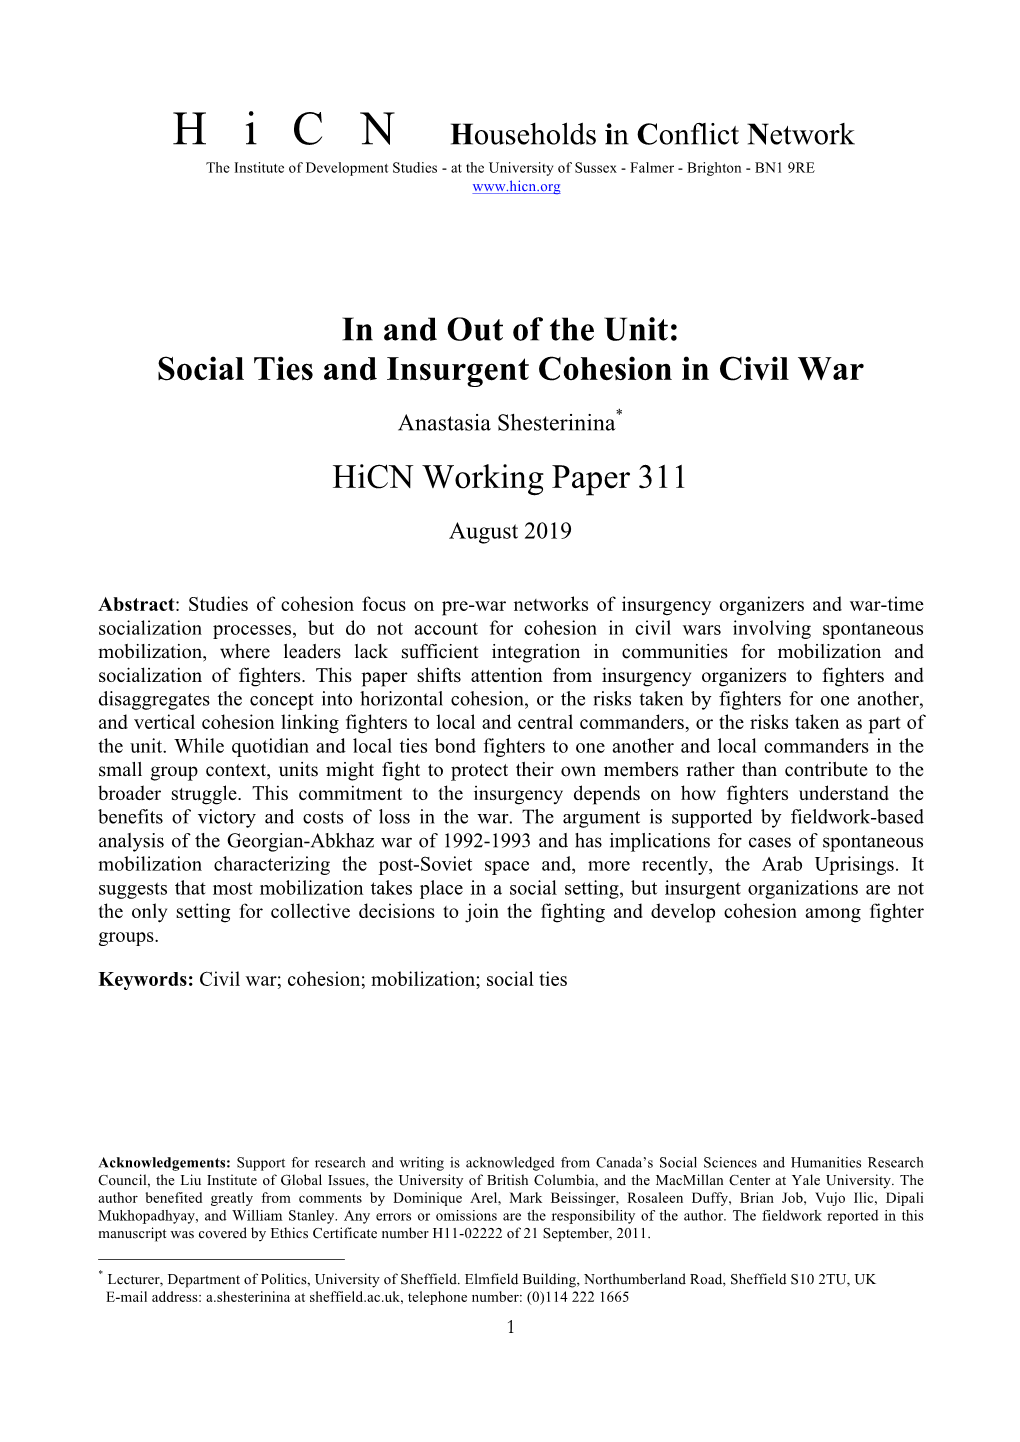 In and out of the Unit: Social Ties and Insurgent Cohesion in Civil War